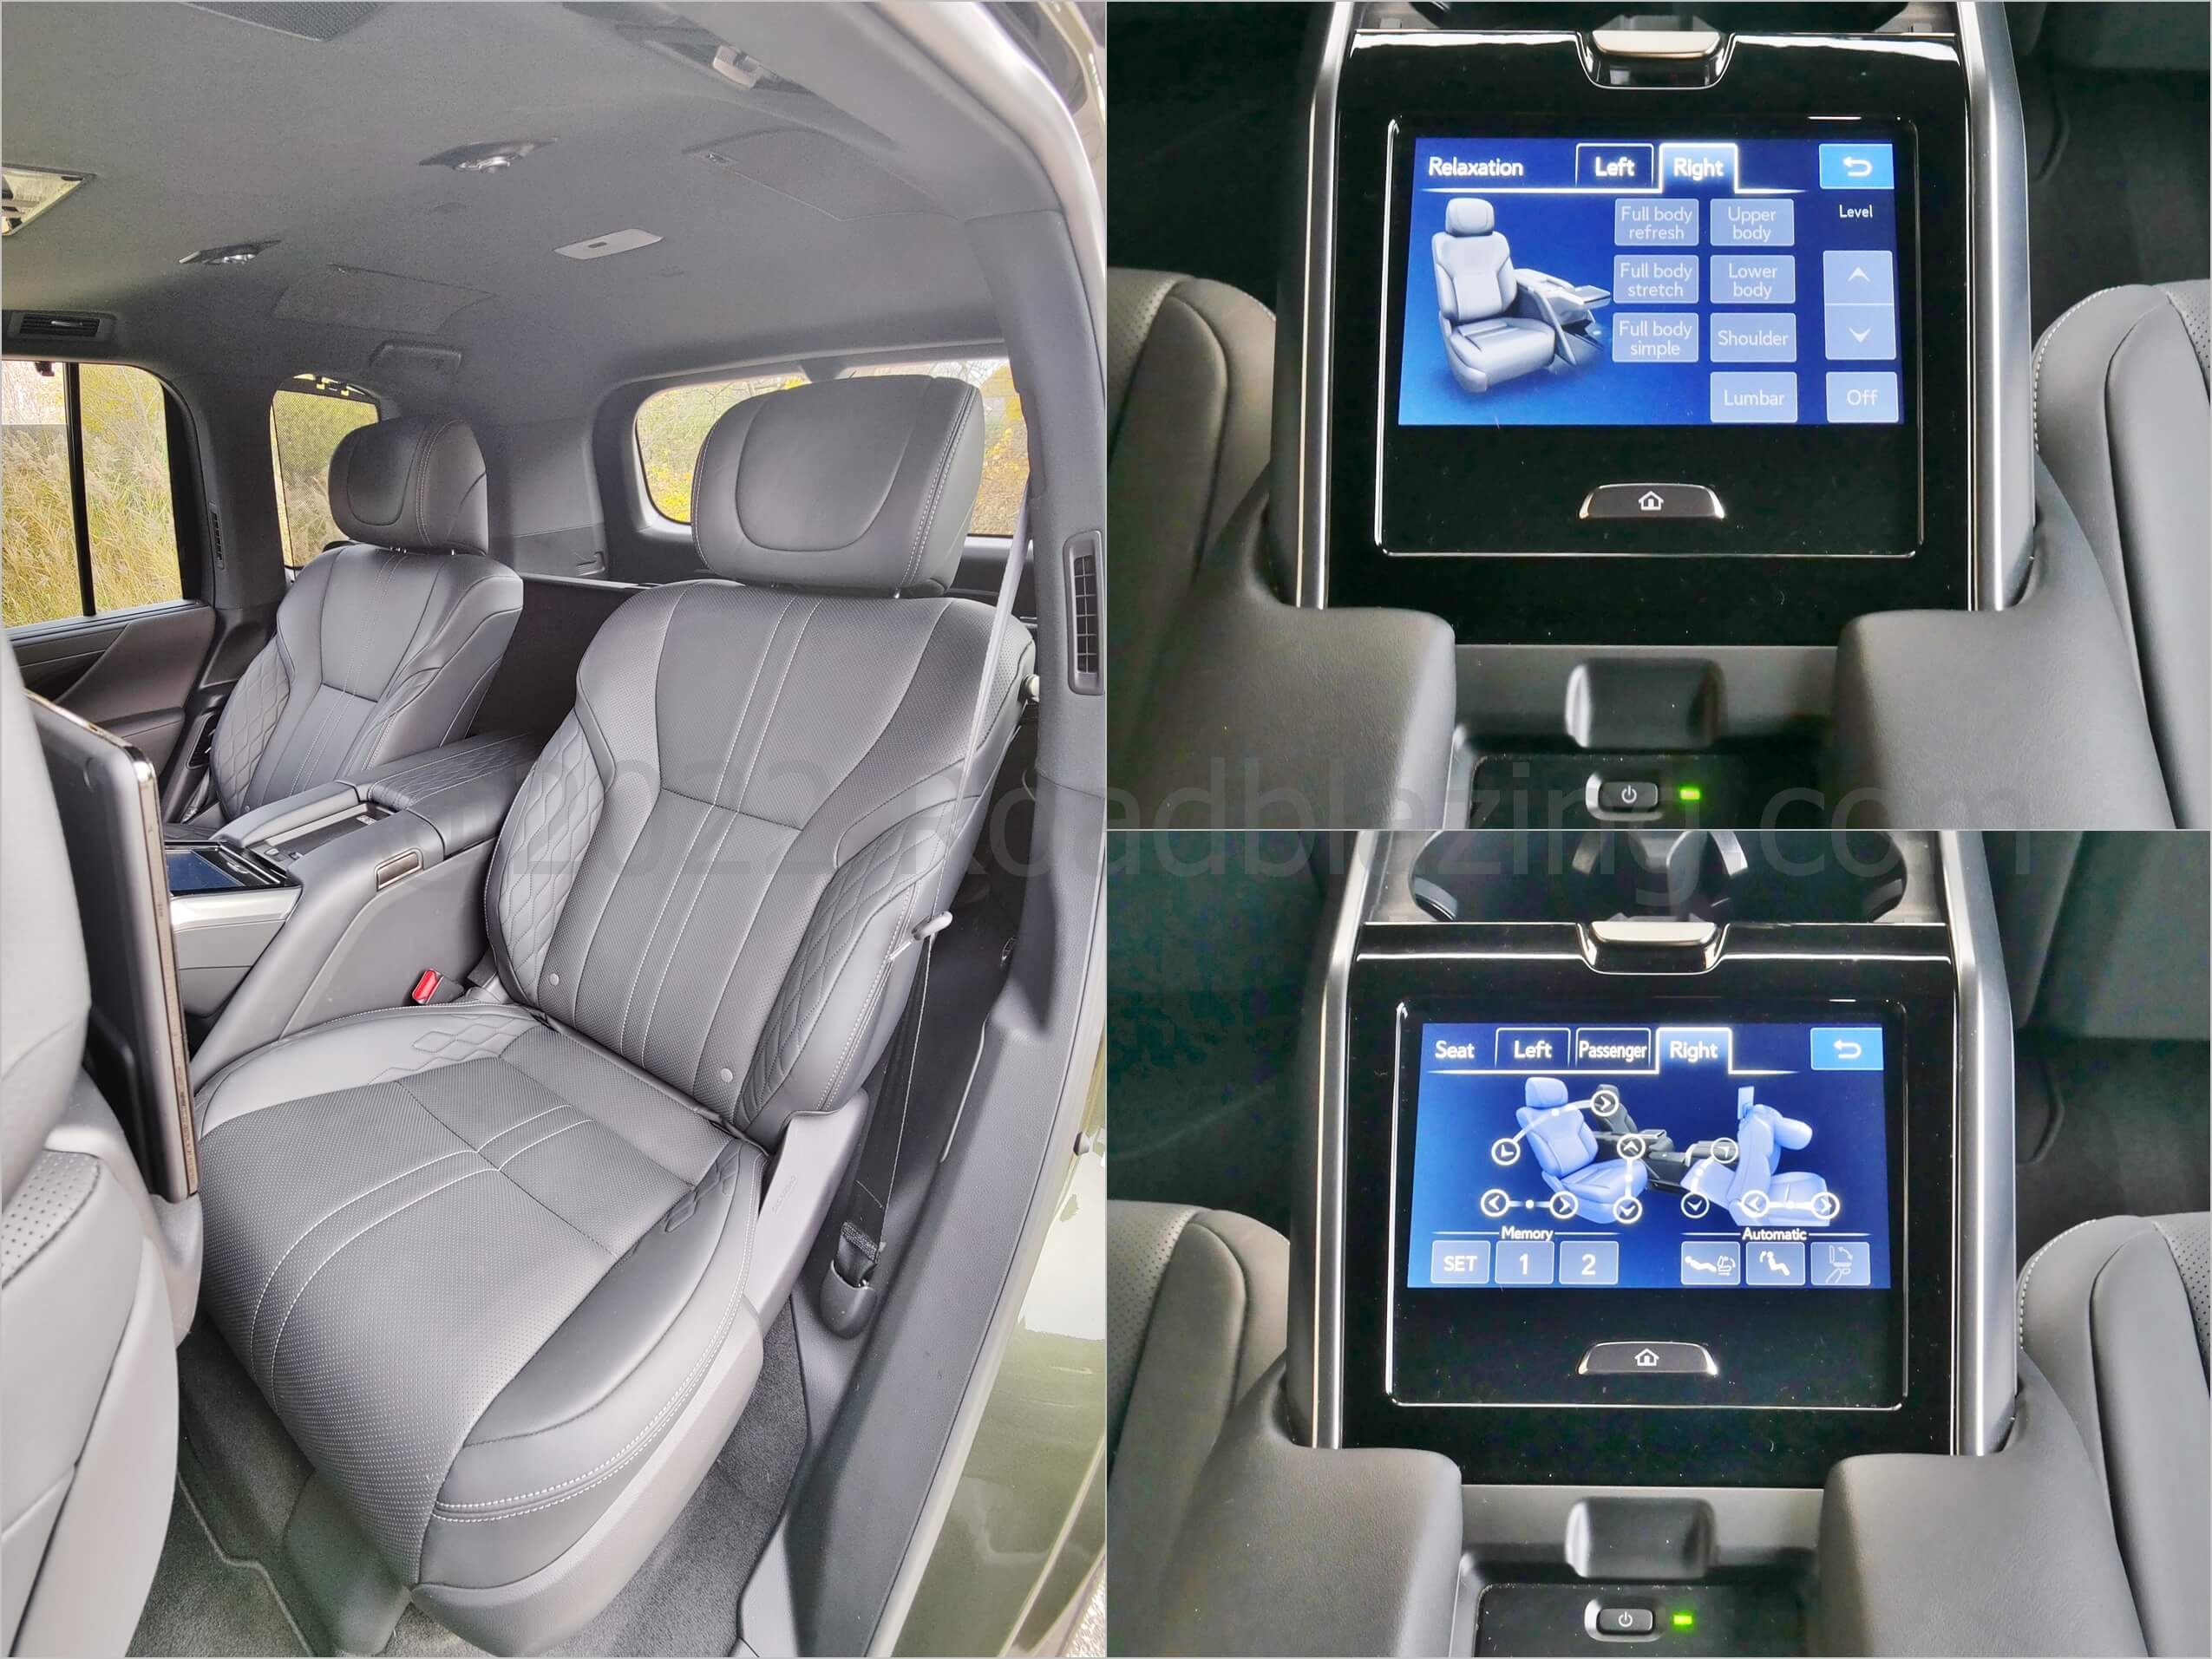 2022 Lexus LX 600 Ultra Luxury: dual 2nd row airline seats w/ center console touch LCD controlled climate, massage, recline + right pax ottoman settings.